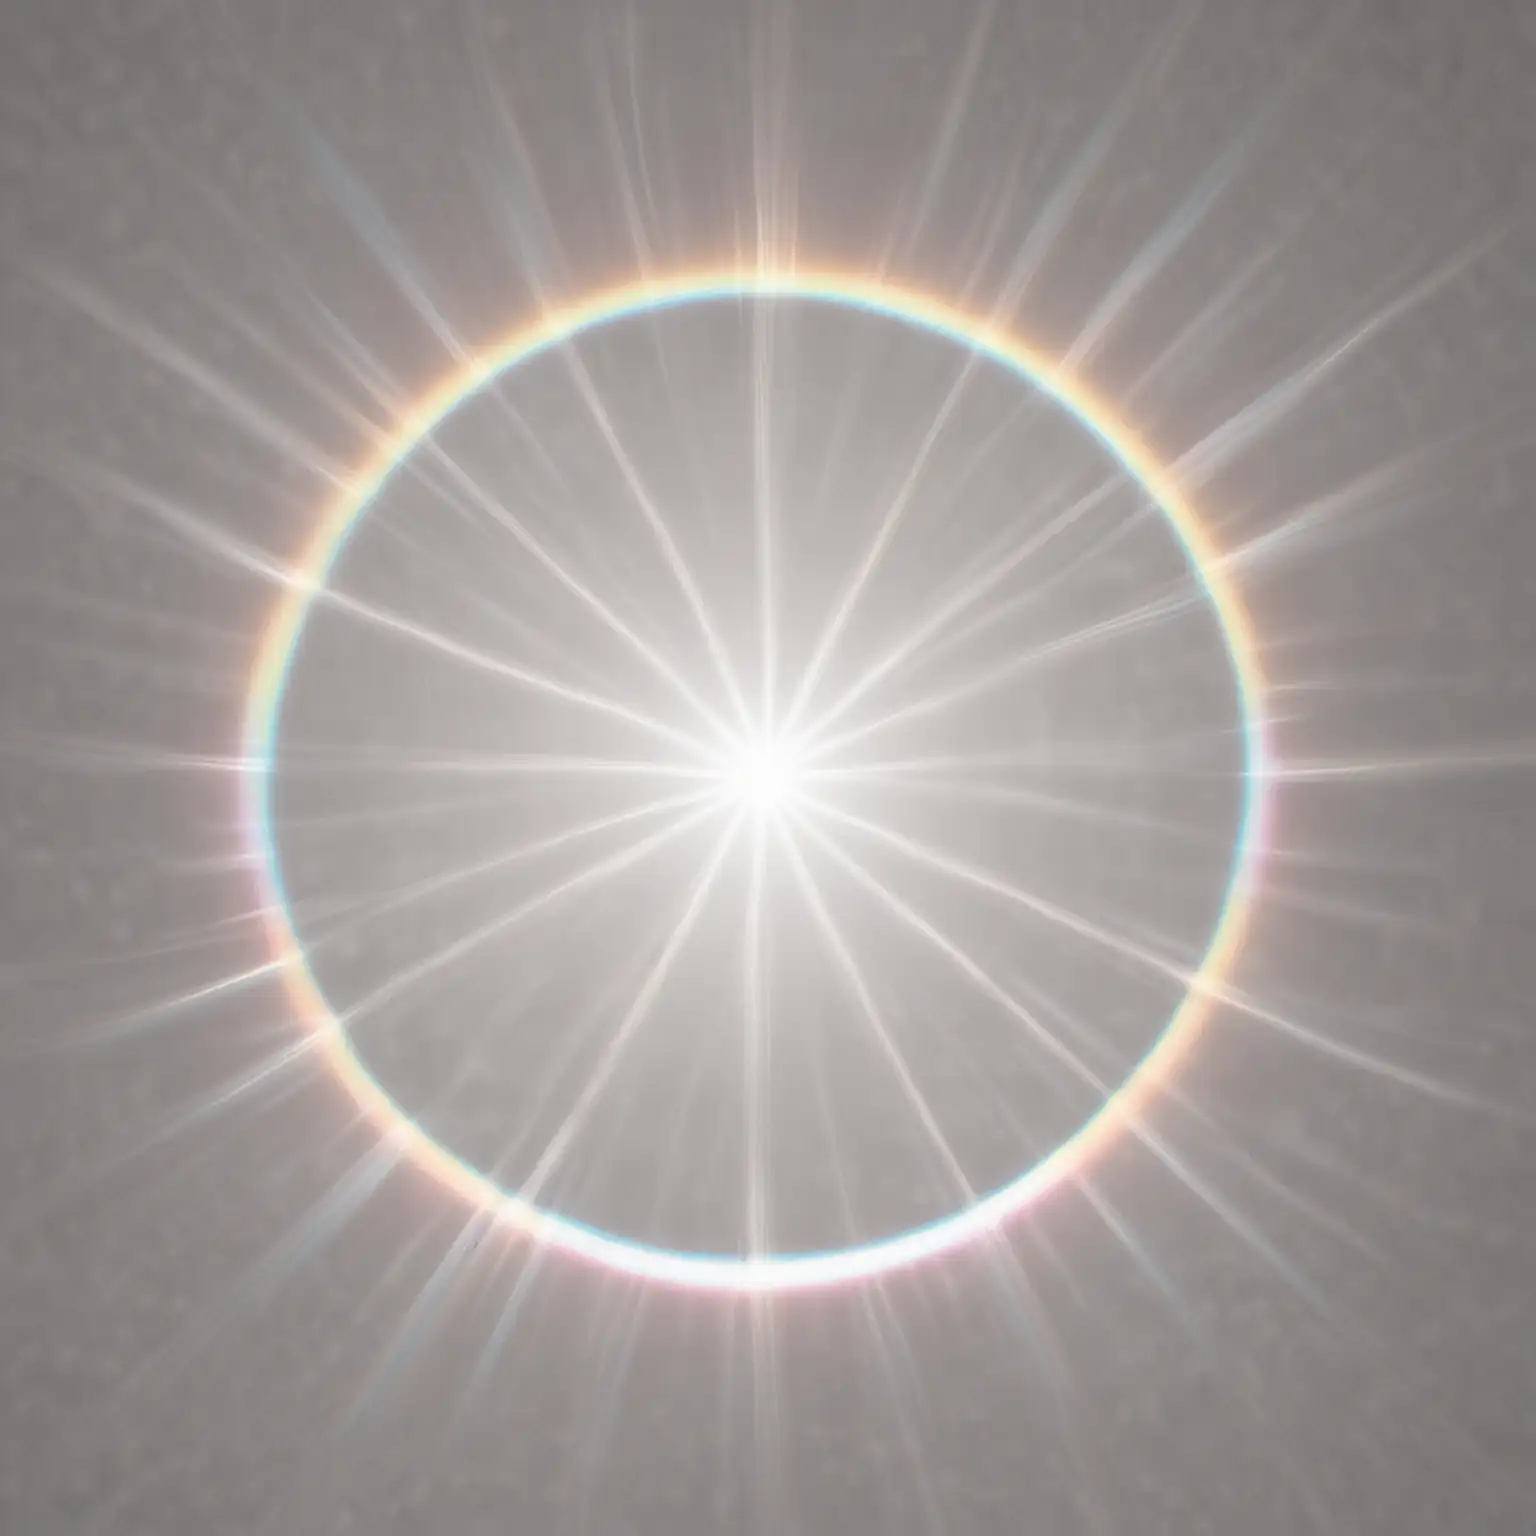 white round white light burst with rainbow light refraction rays coming out 